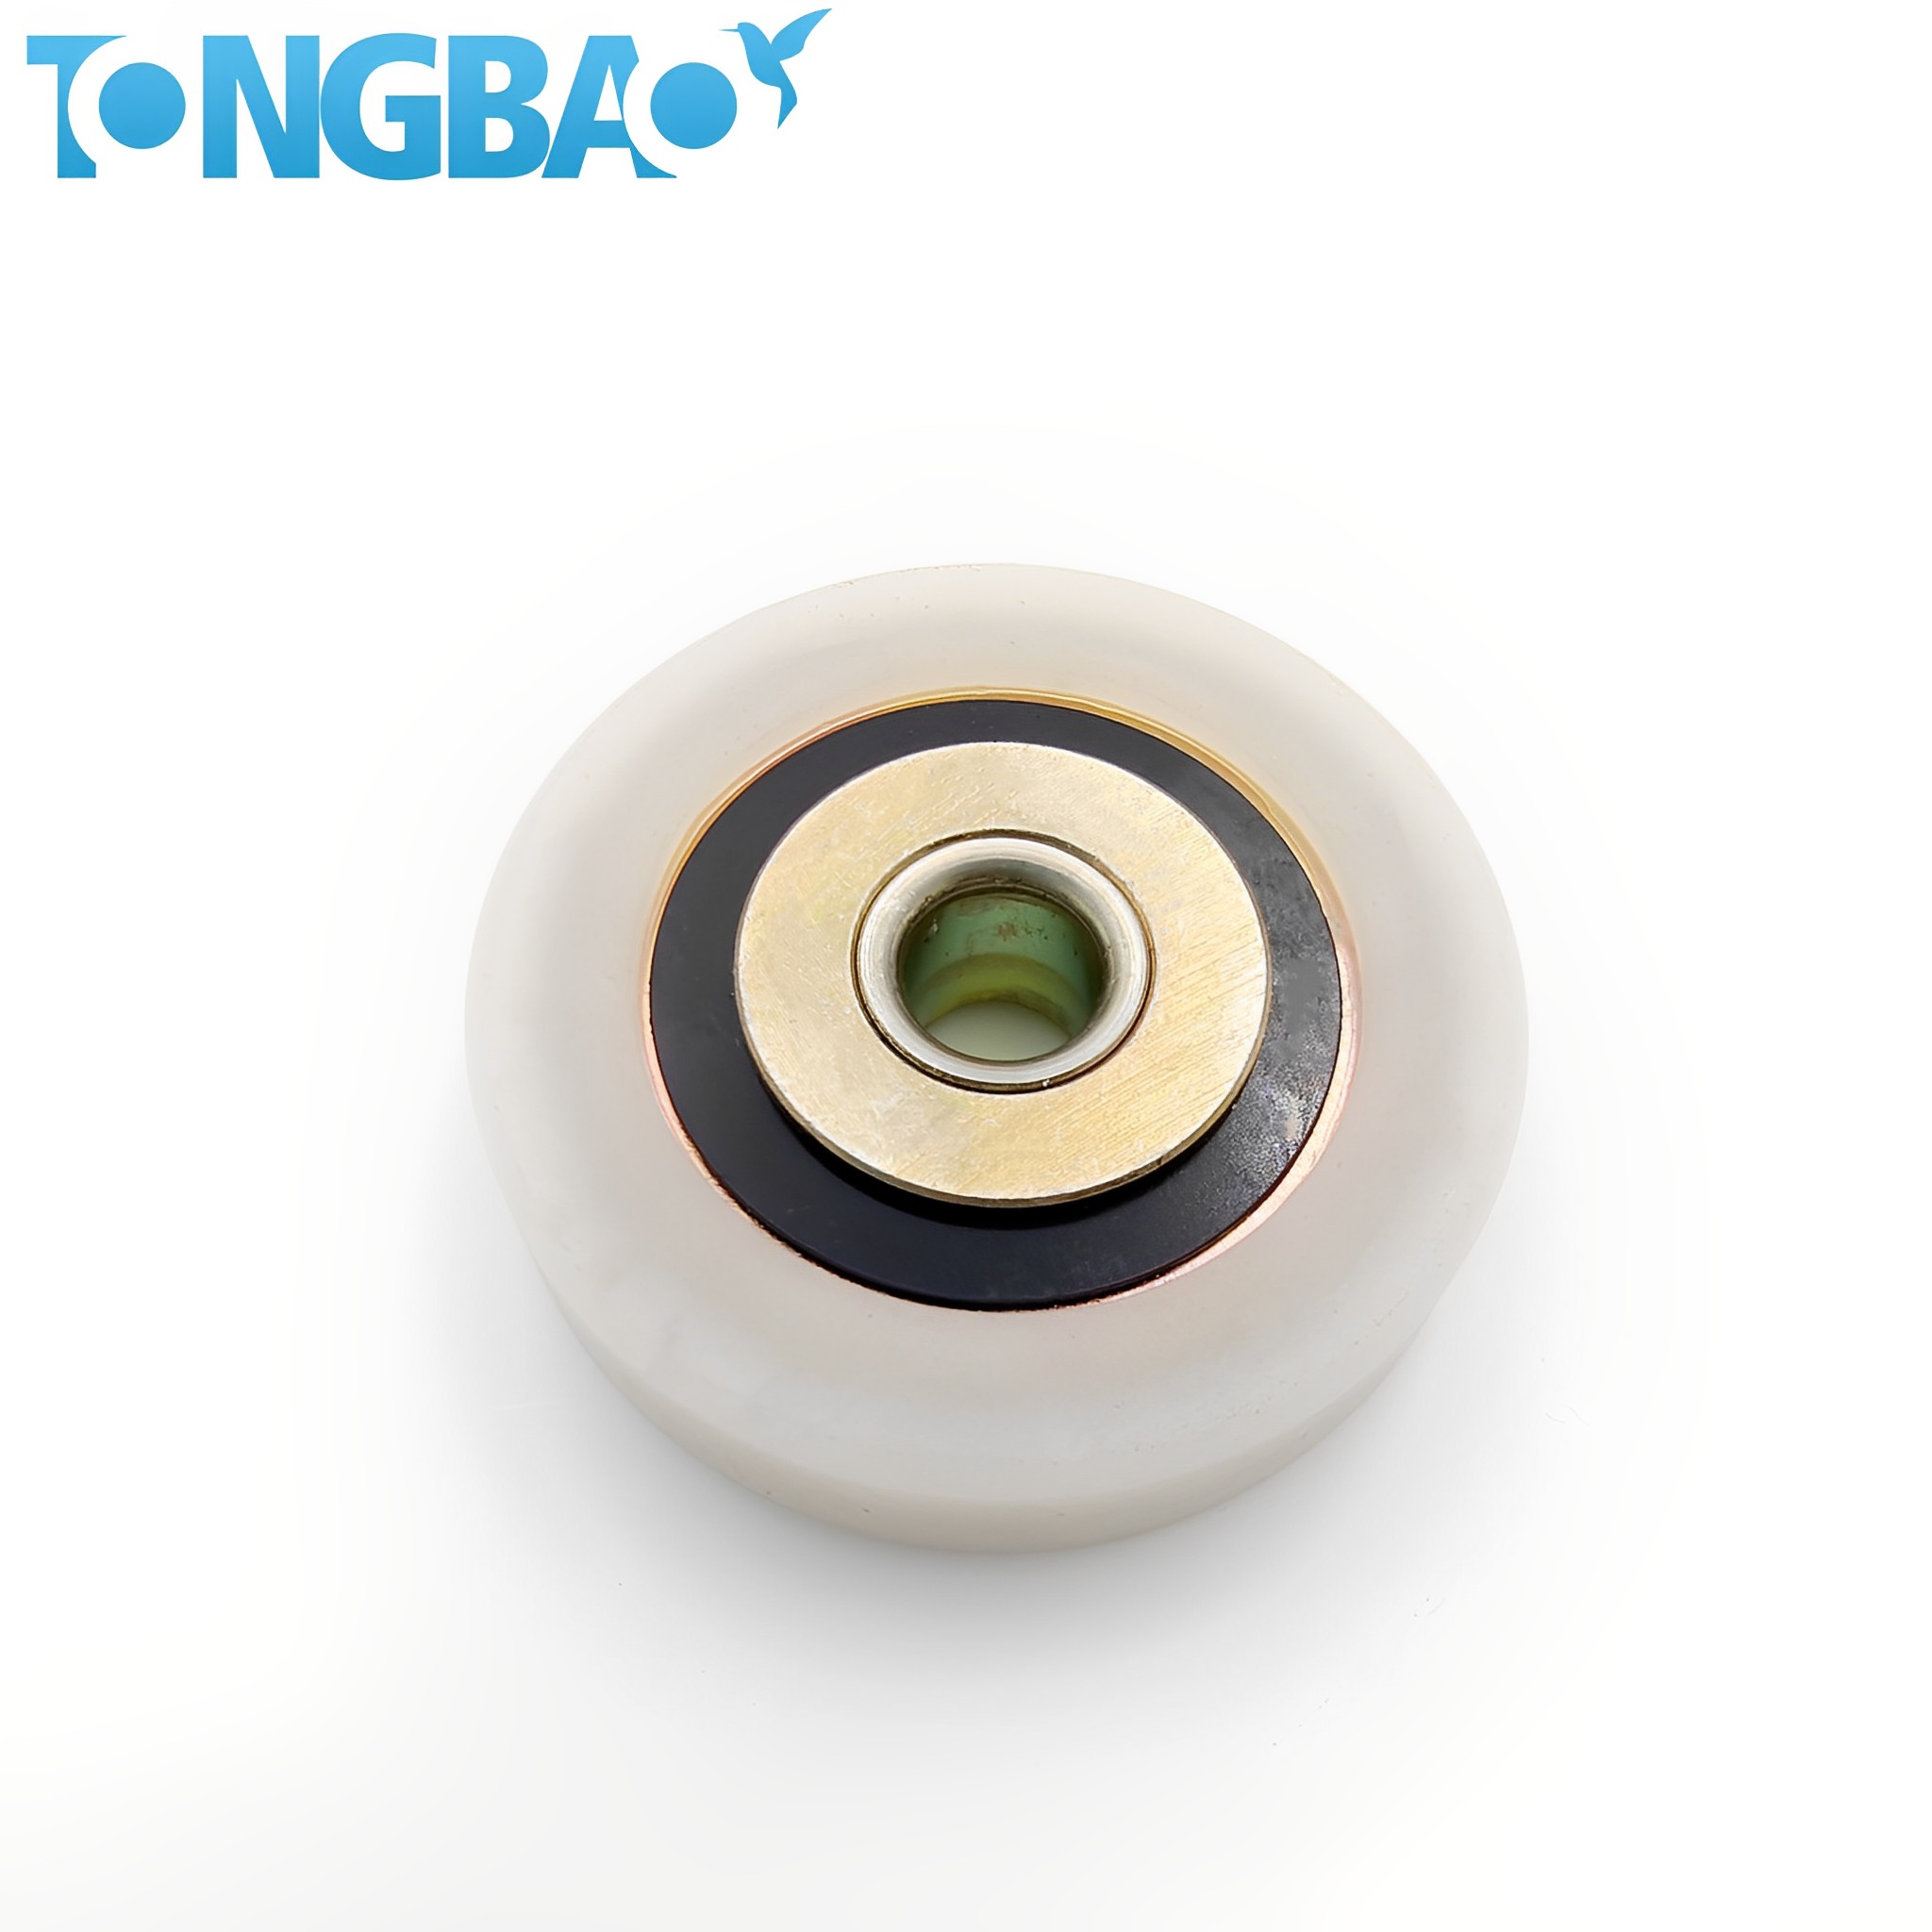 Yellow Zinc Plated Plastic Wheel Bearing for Supporting The Guide Rail of The Track of Dry Cleaning Shop